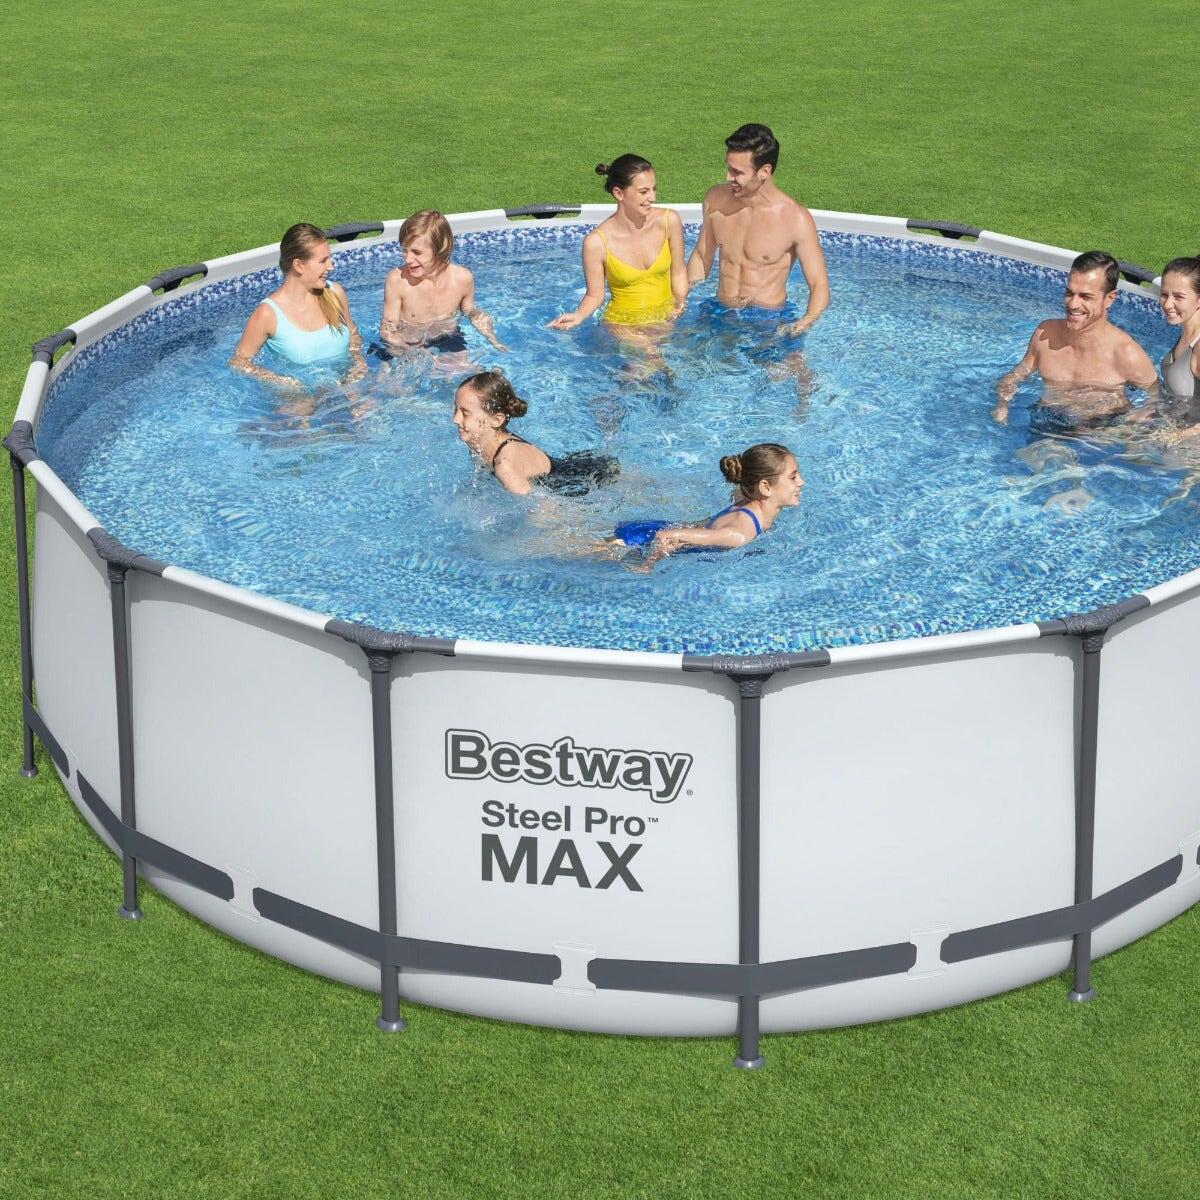 Bestway 15ft x 48" Steel Pro MAX Round Above Ground Swimming Pool 2/7